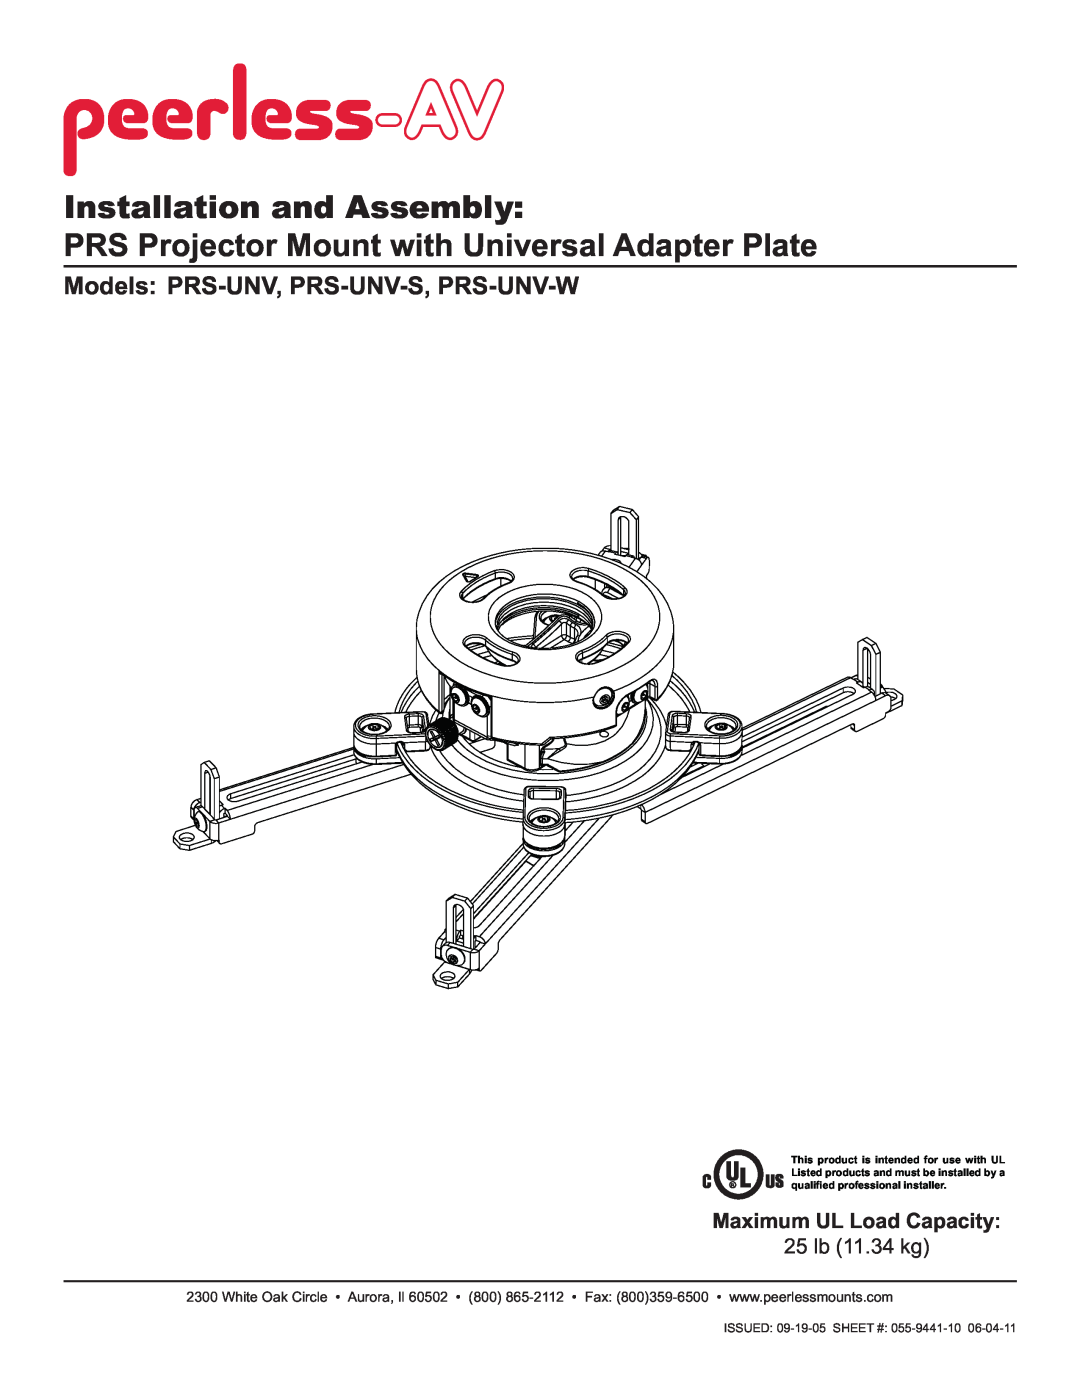 Peerless Industries PRS-UNV-W manual Installation and Assembly, PRS Projector Mount with Universal Adapter Plate 